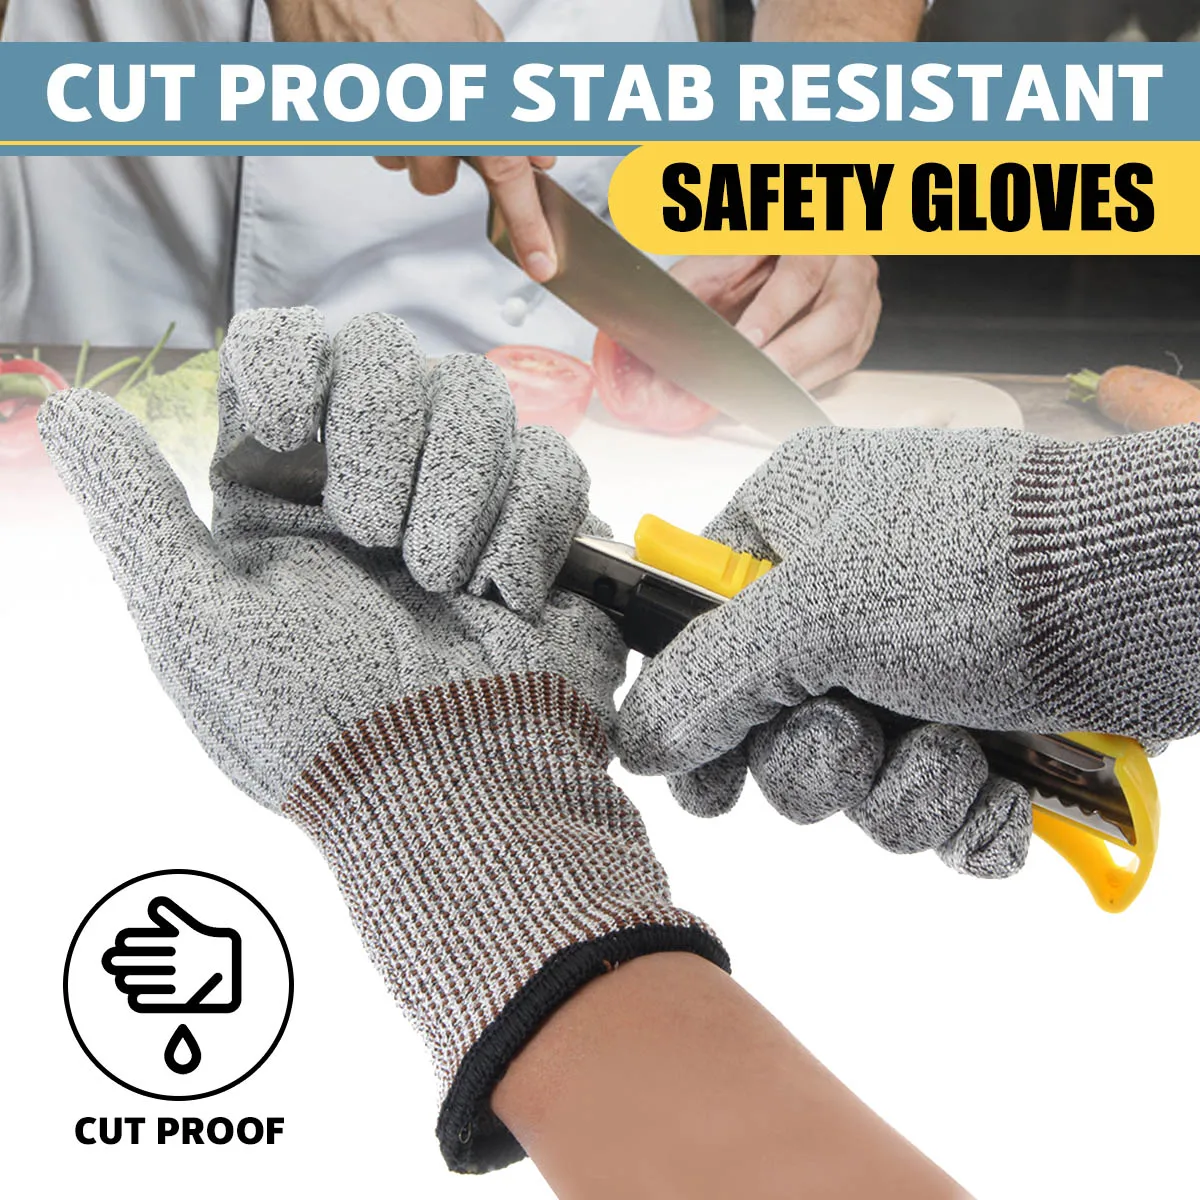 https://ae01.alicdn.com/kf/HTB1XxlAcl1D3KVjSZFyq6zuFpXaD/Aomily-5-Grade-Cut-Resistant-Safety-Glove-Cut-Proof-Stab-Resistant-Stainless-Steel-Wire-Metal-Mesh.jpg